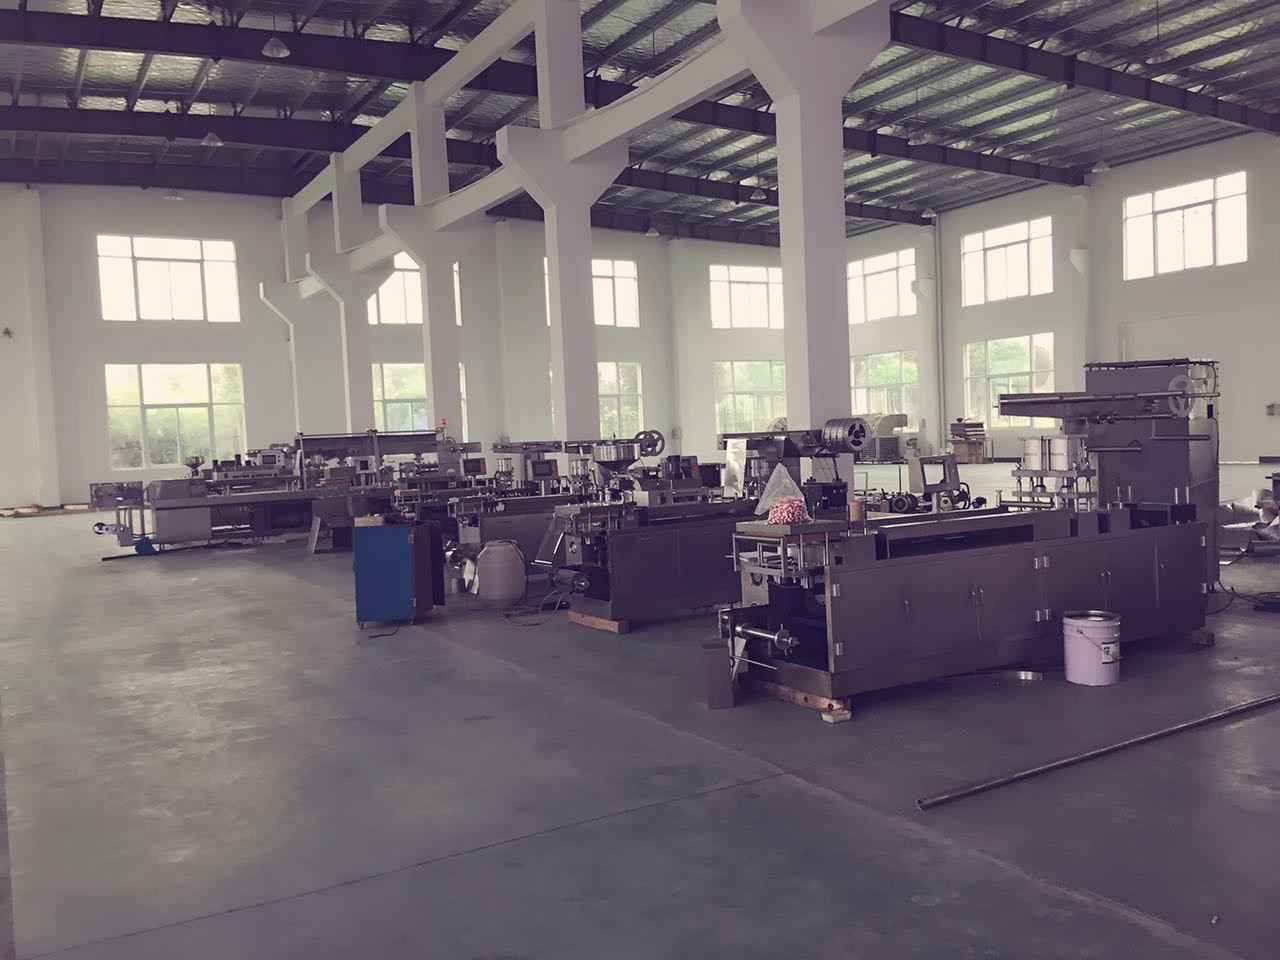 Business Alu PVC Small Blister Packaging Machine high efficiency